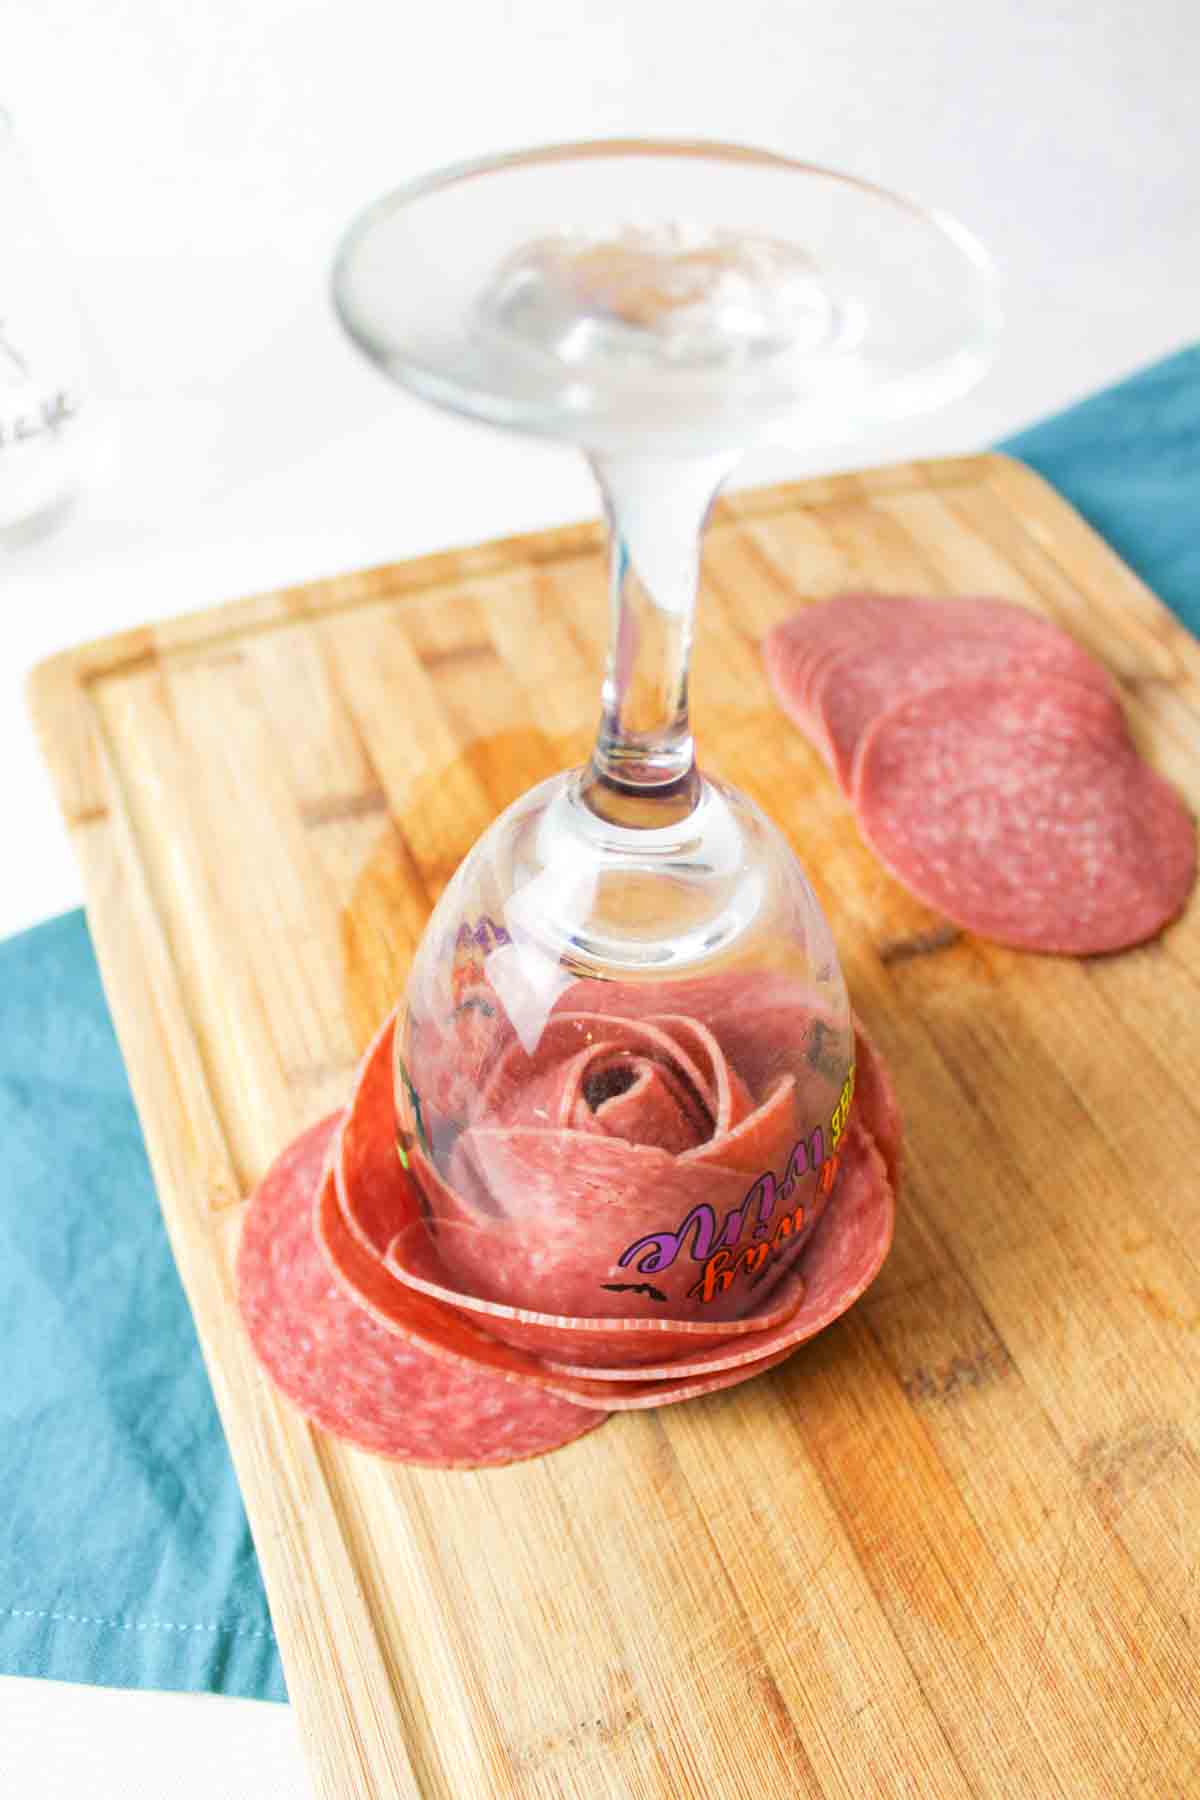 wine glass with folded deli meat over the rim turned upside down to show a rose inside.